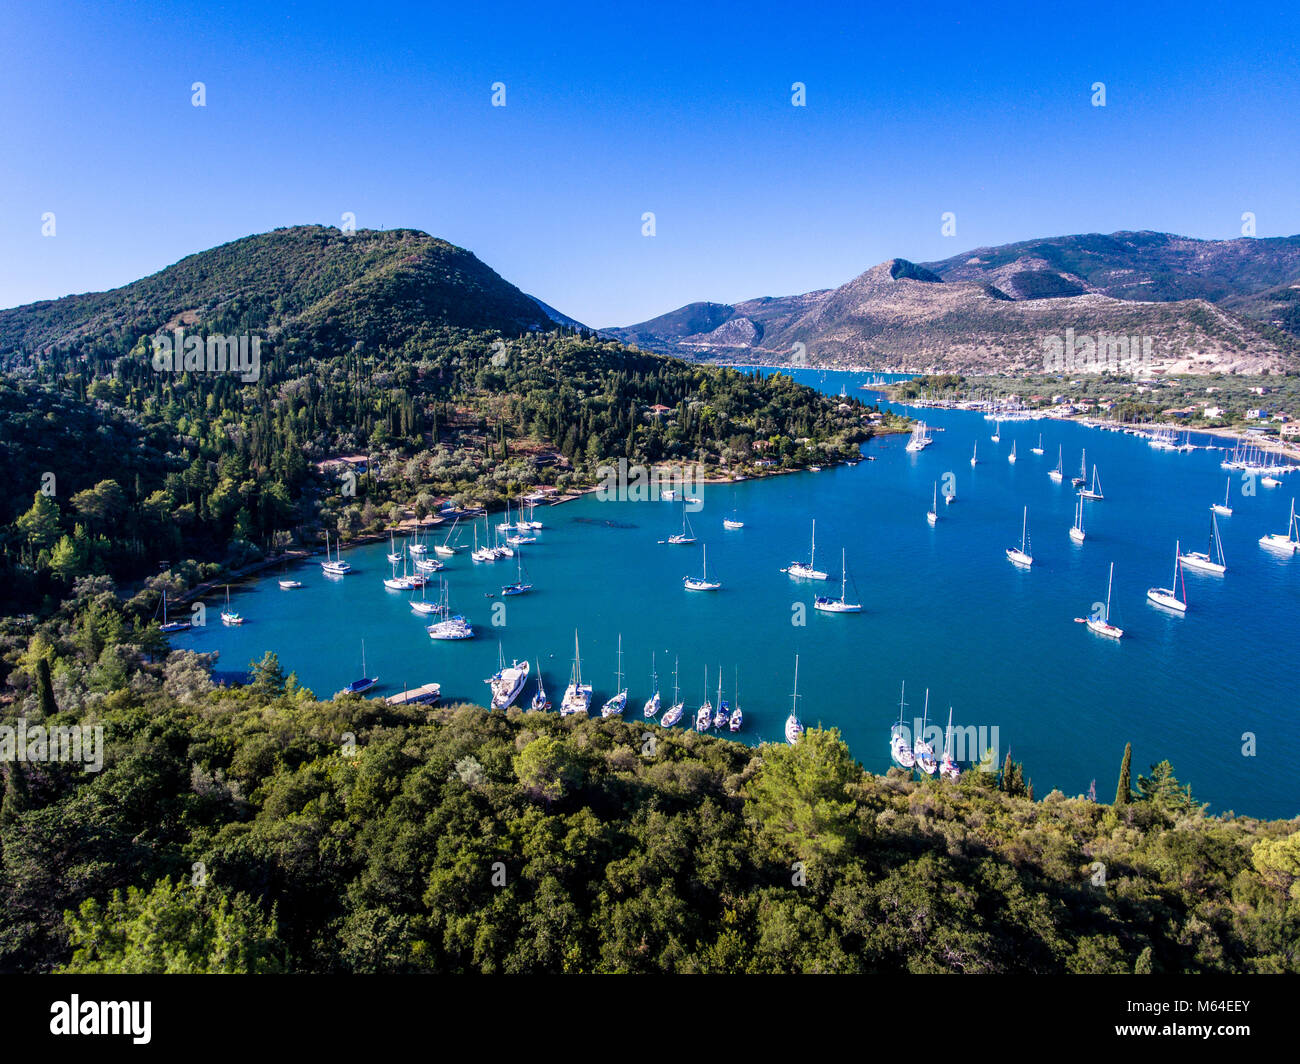 Nidri bay and harbour for yachts in Lefkada, Greece Stock Photo